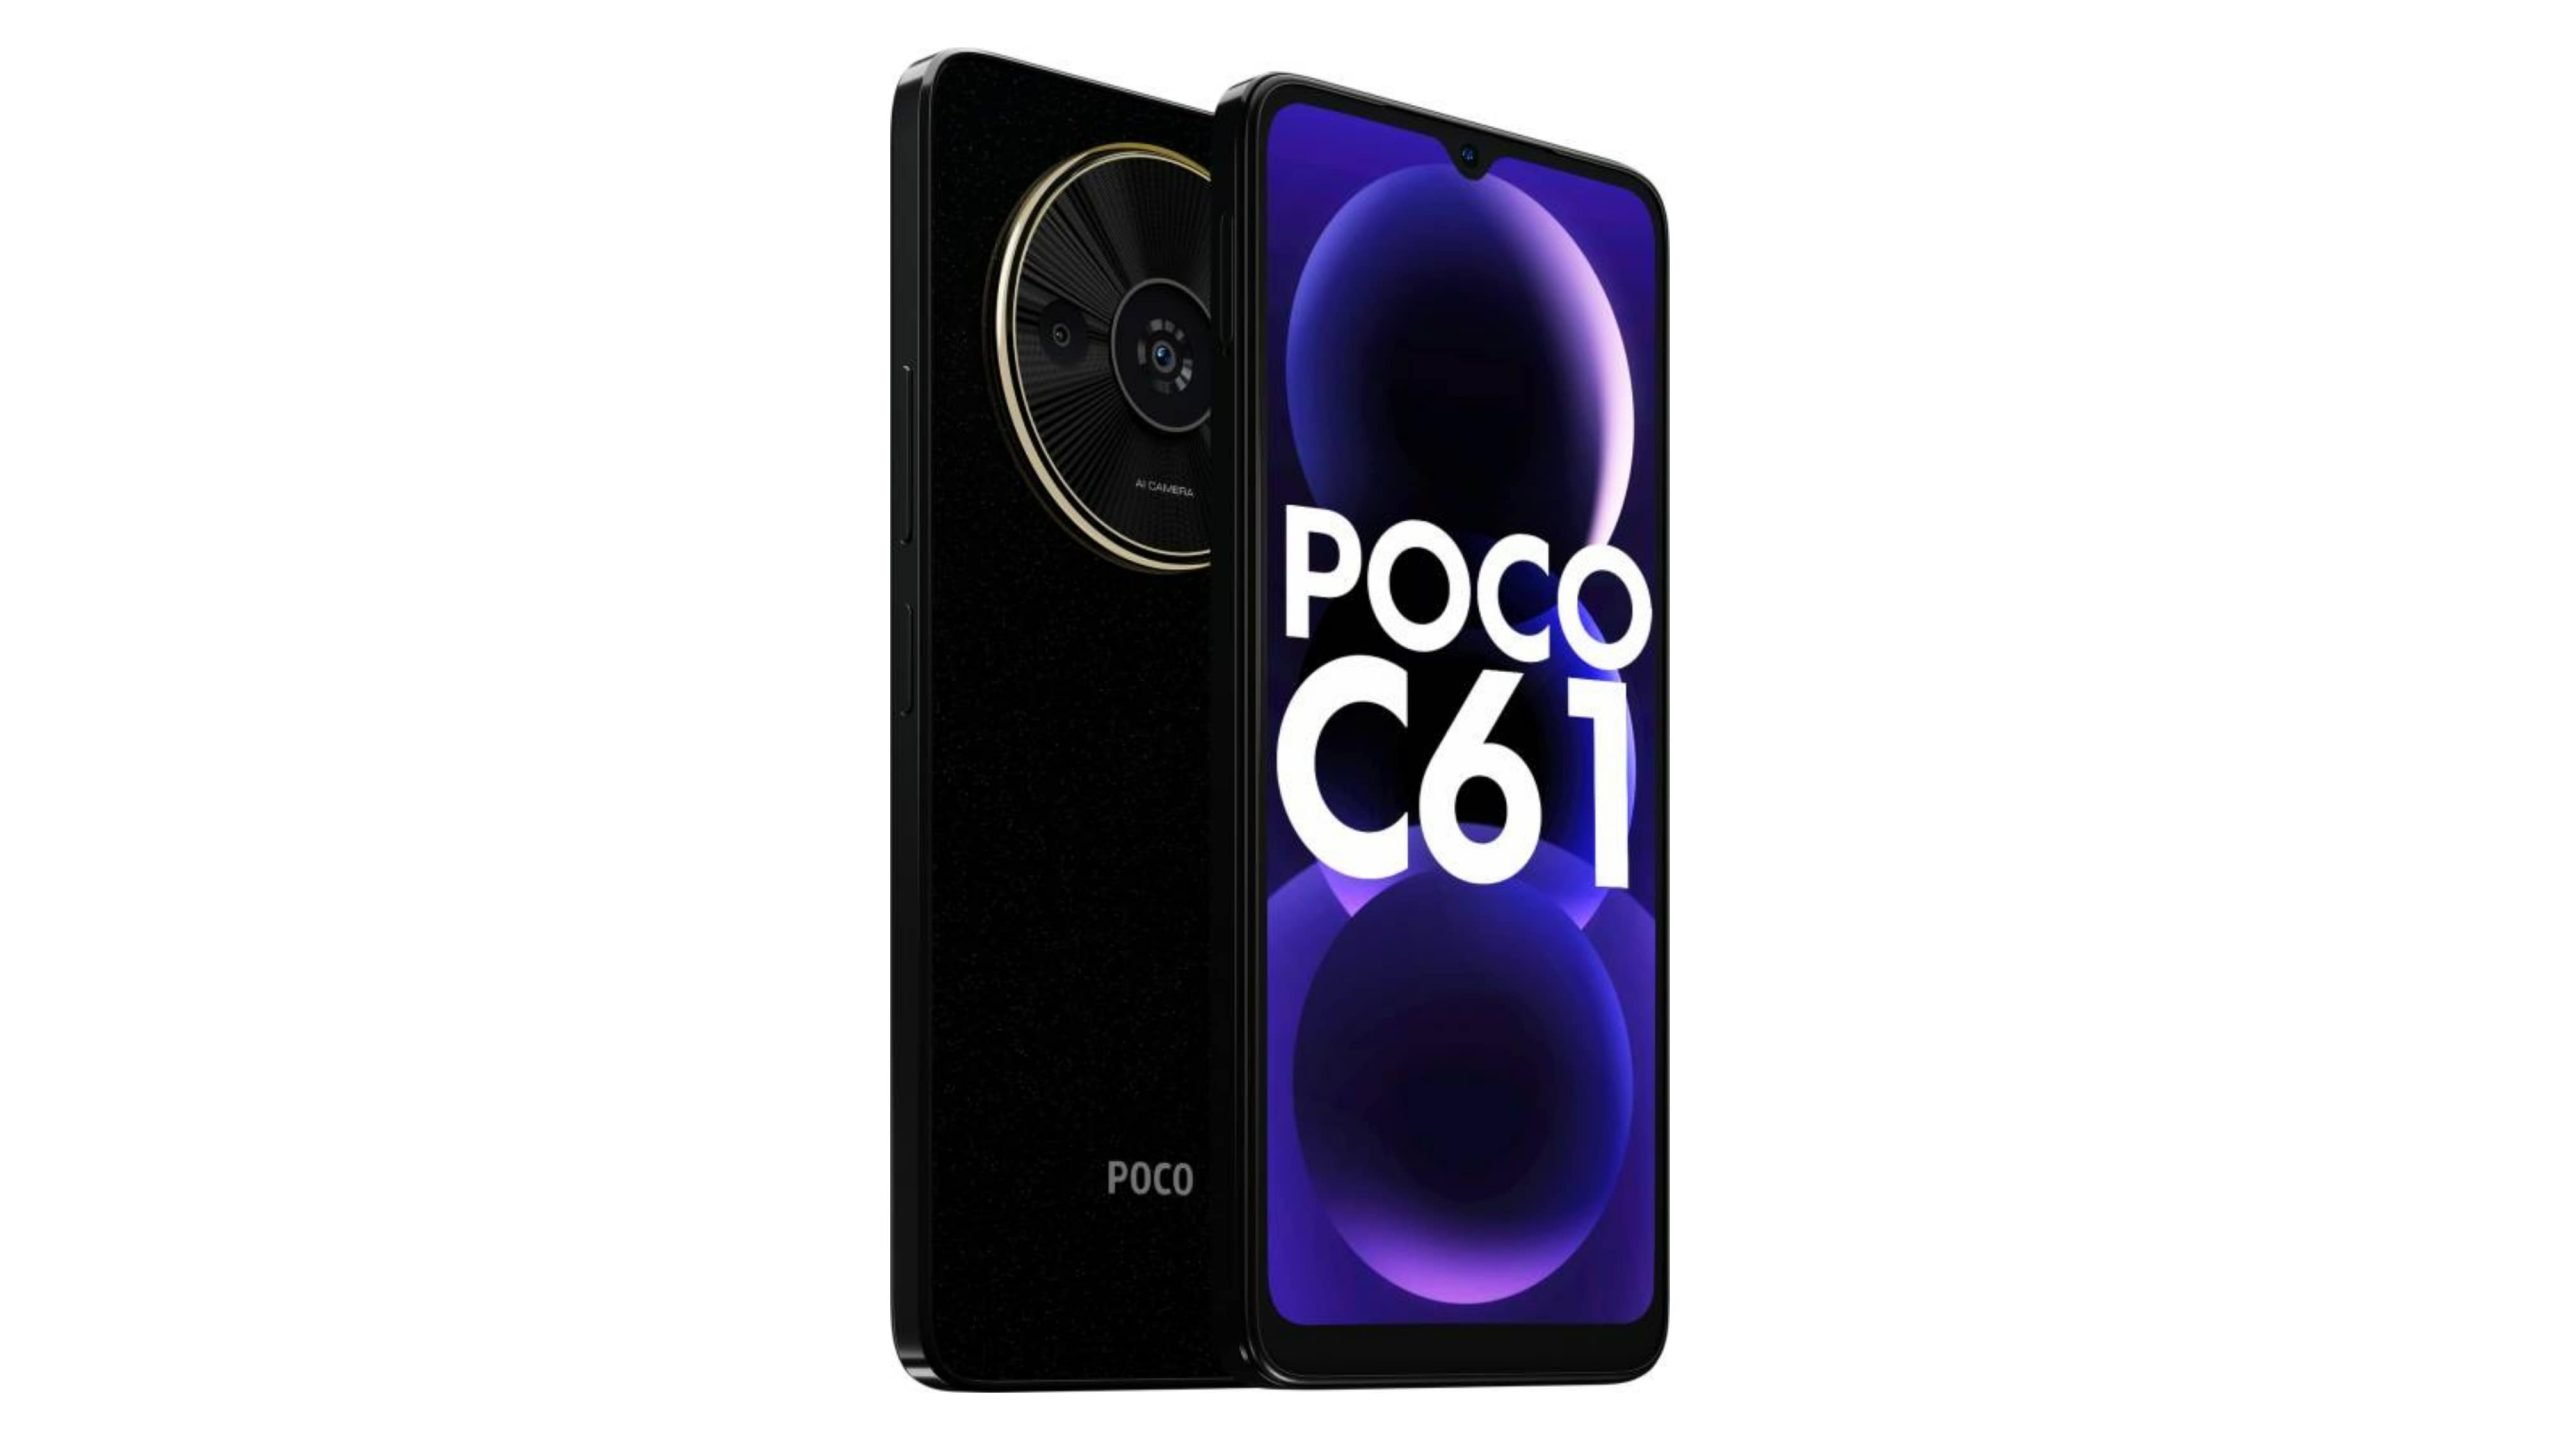 POCO C61 on Sale in India for ₹6,999! Features 6.71″ Display, Helio G36 processor & 5,000mAh battery - News - News